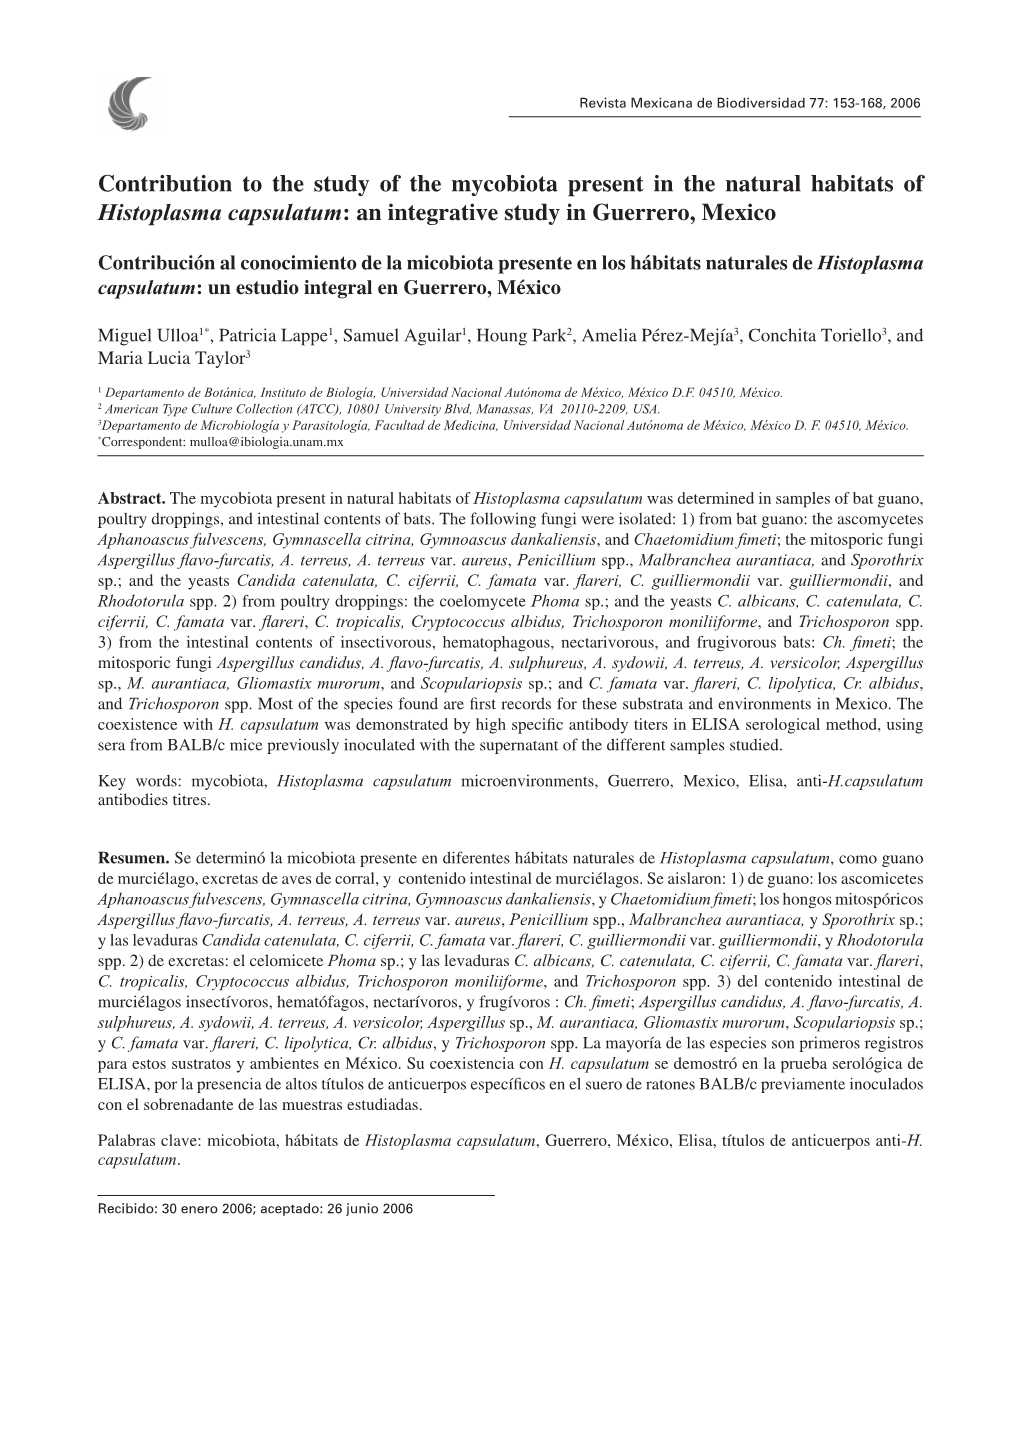 Contribution to the Study of the Mycobiota Present in the Natural Habitats of Histoplasma Capsulatum: an Integrative Study in Guerrero, Mexico